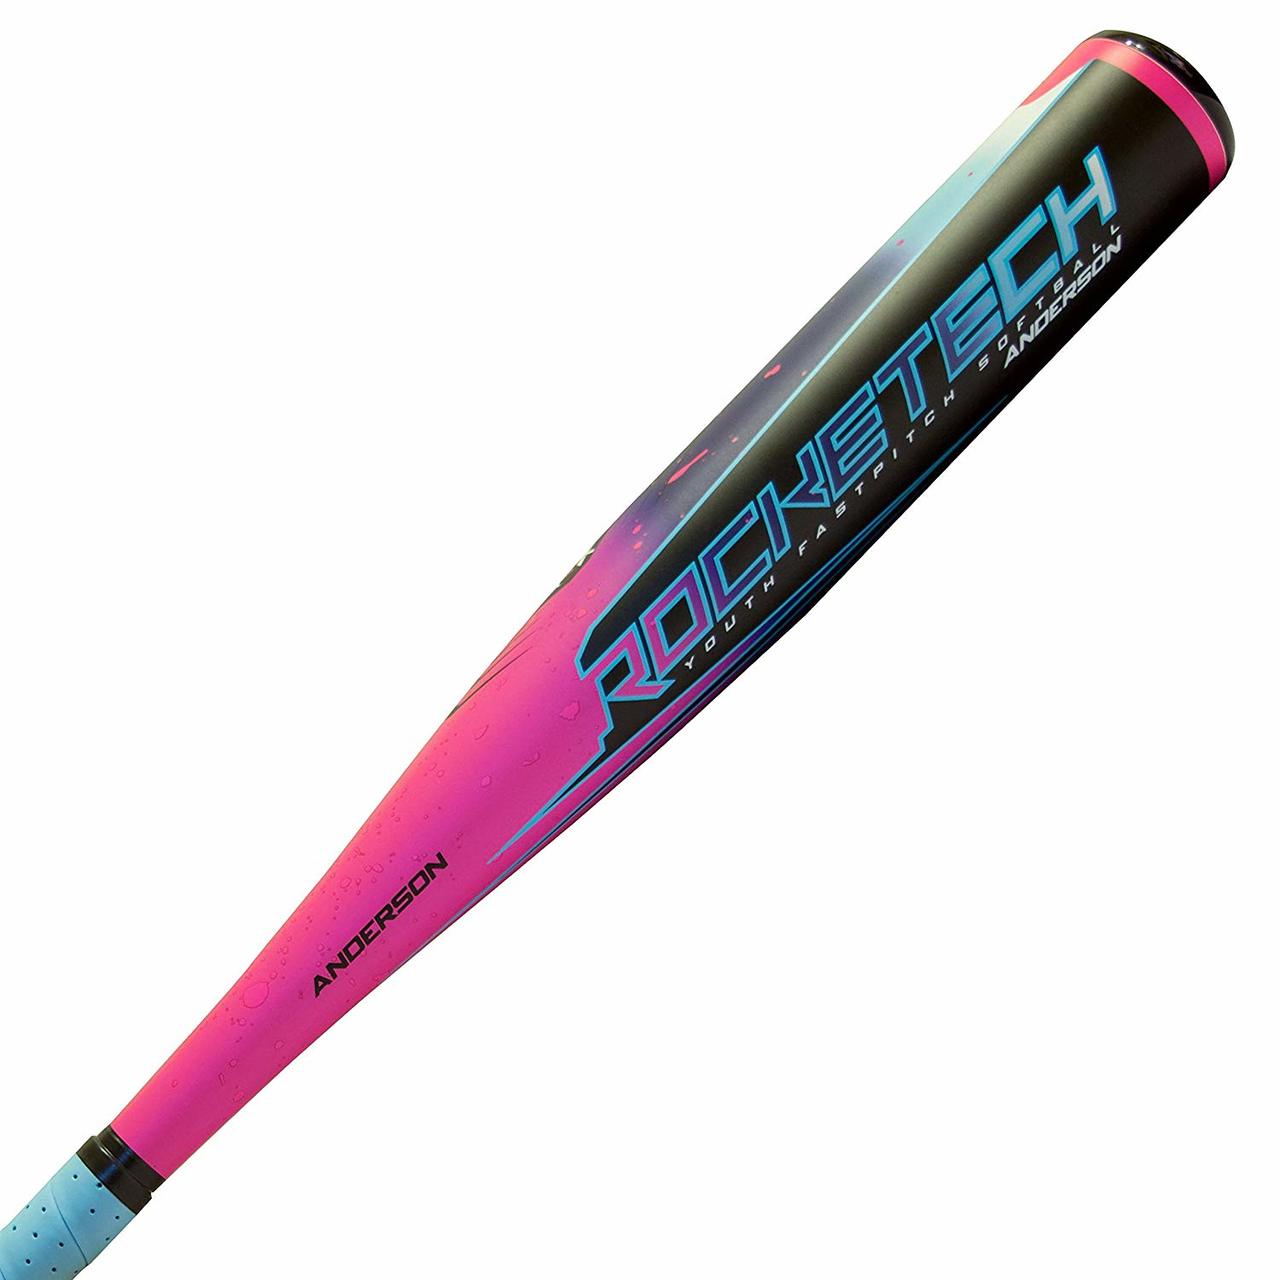 anderson-rocketech-12-youth-fastpitch-softball-bat-30-inch-18-oz 017036-3018 Anderson 874147008515 Ideal for girls ages 7-10 2 ¼” Barrel / -12 Drop